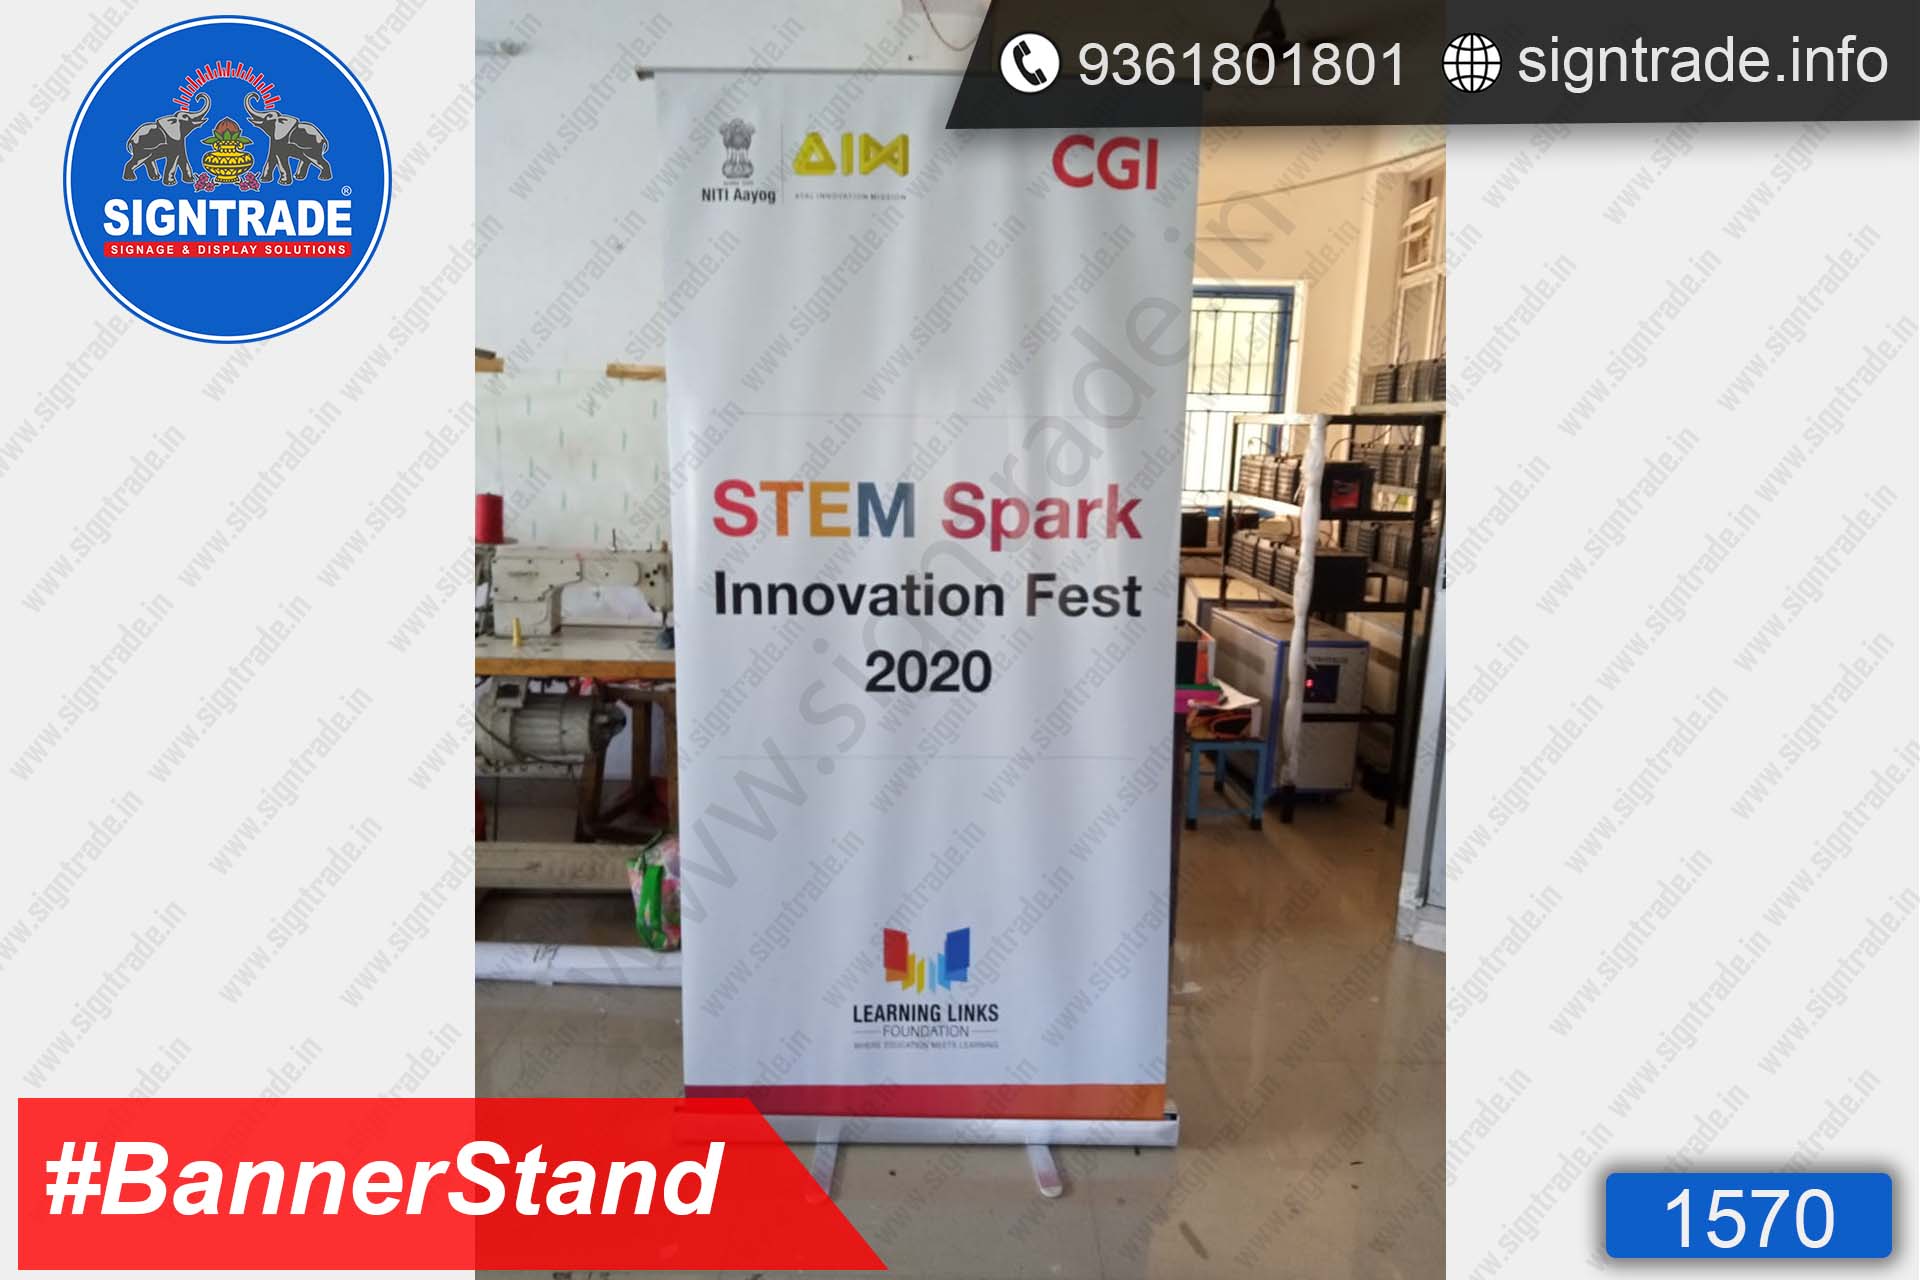 Stem Spark Innovation Fest 2020 - Learning Links Foundation, Chennai - SIGNTRADE - Roll Up Banner Stand Manufacturers in Chennai